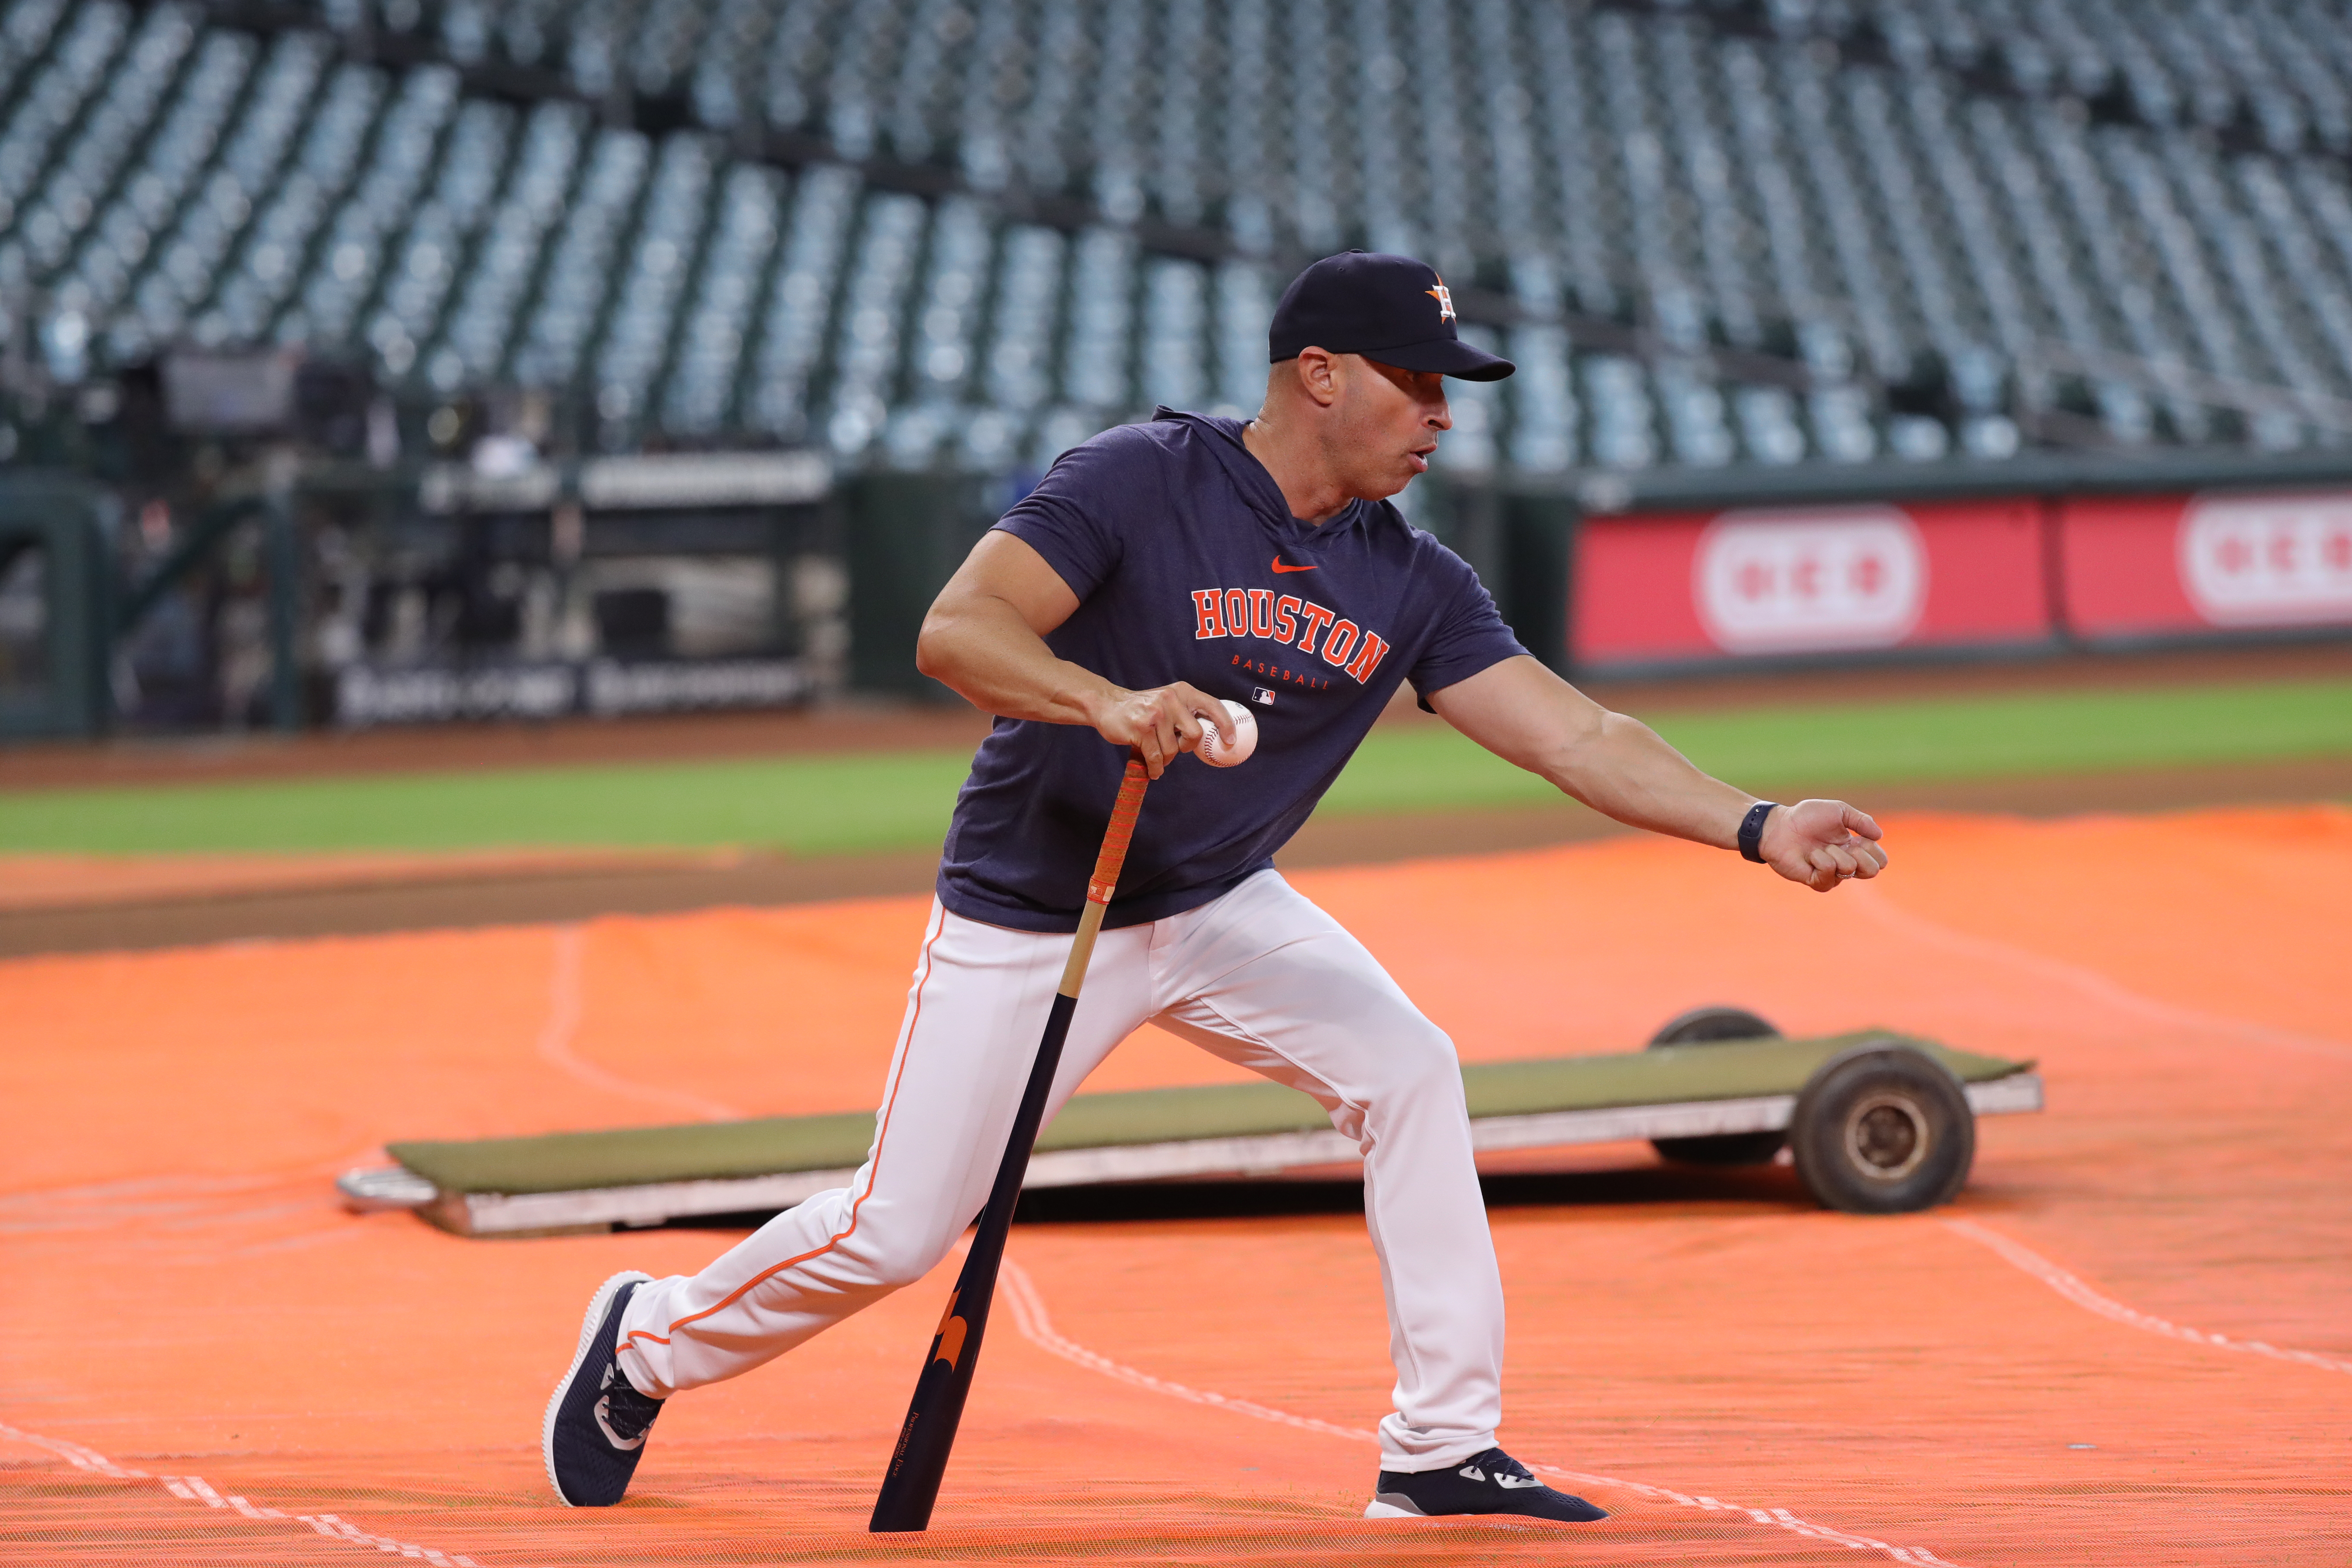 Joe Espada, bench coach of the Houston Astros, looks on during practice at Minute Maid Park in Houston, Texas, June 17, 2023. /CFP